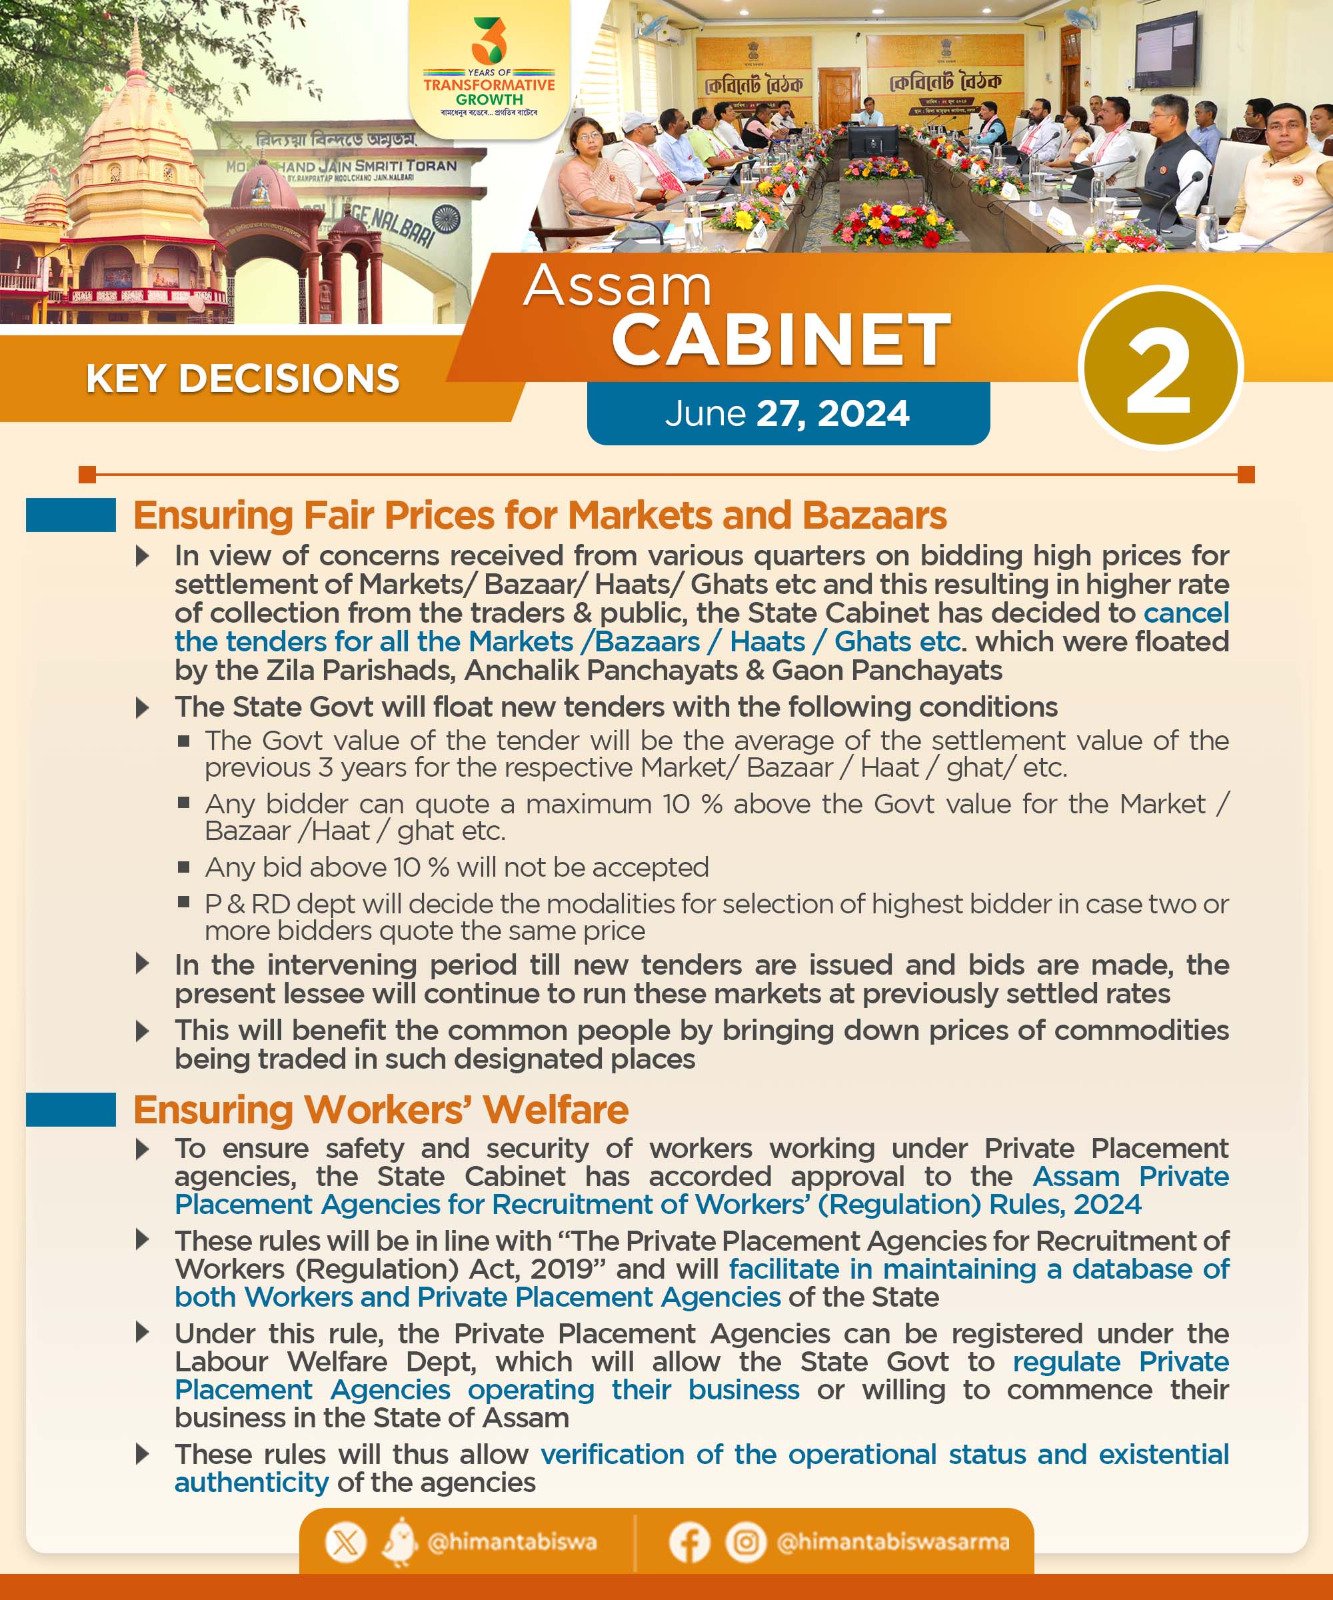 Cabinet Decision on 27th June, 2024 (2)